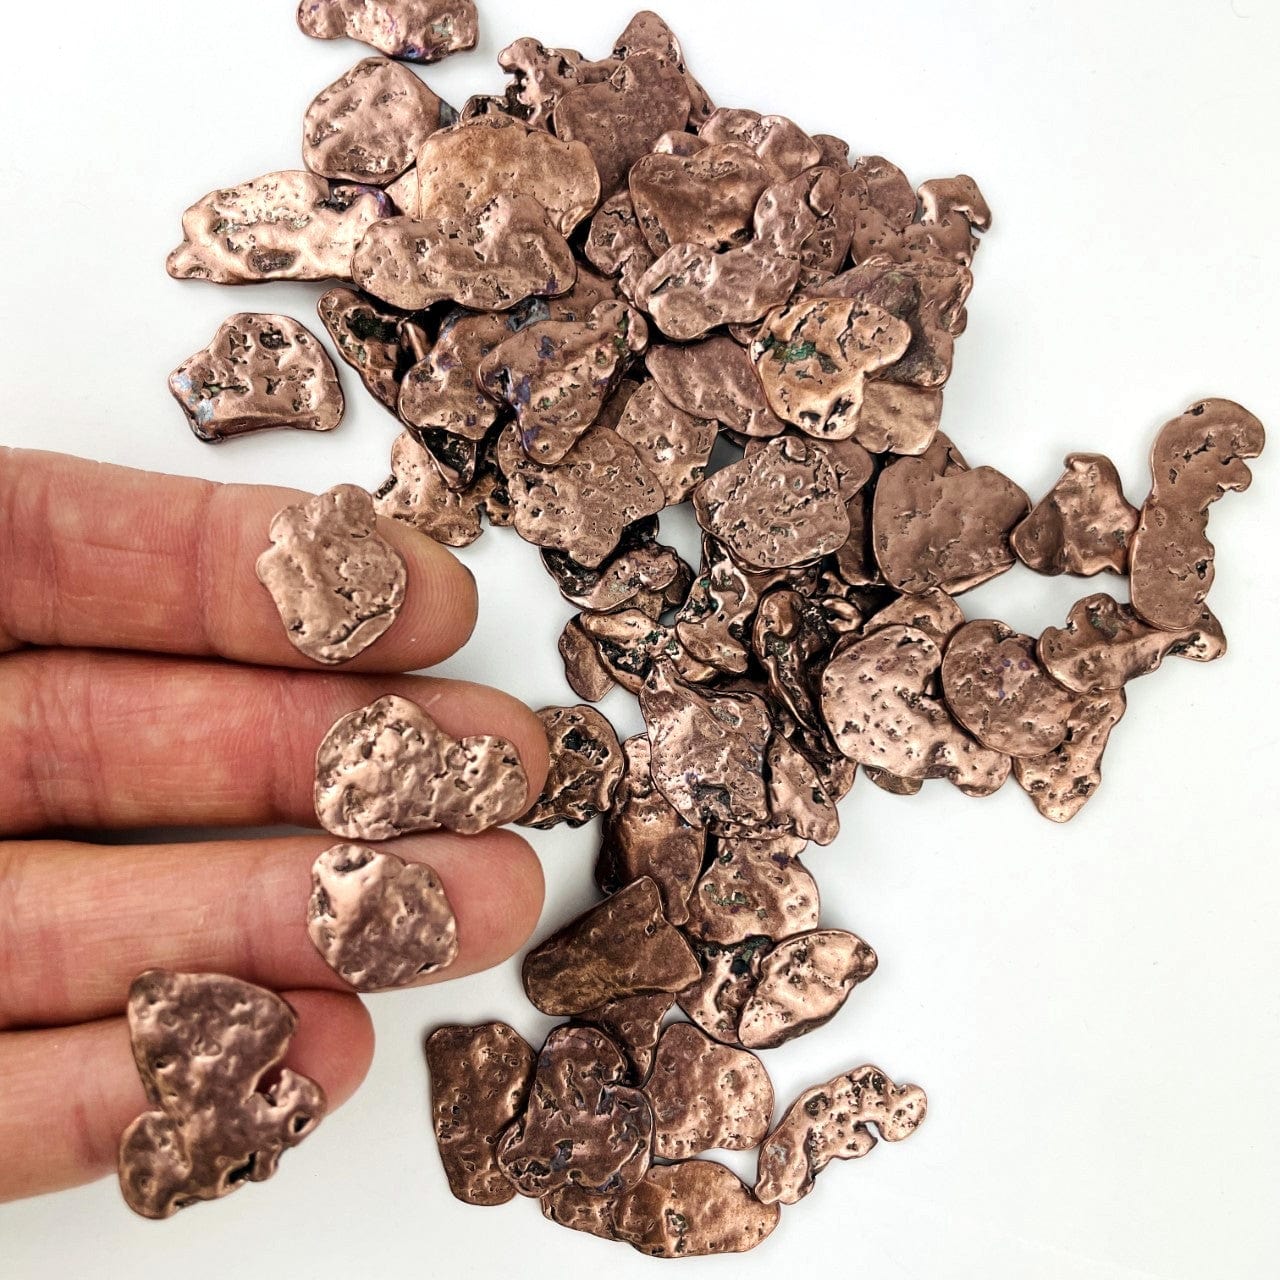 Copper Nuggets - Freeform Shapes with 4 on a hand for size reference